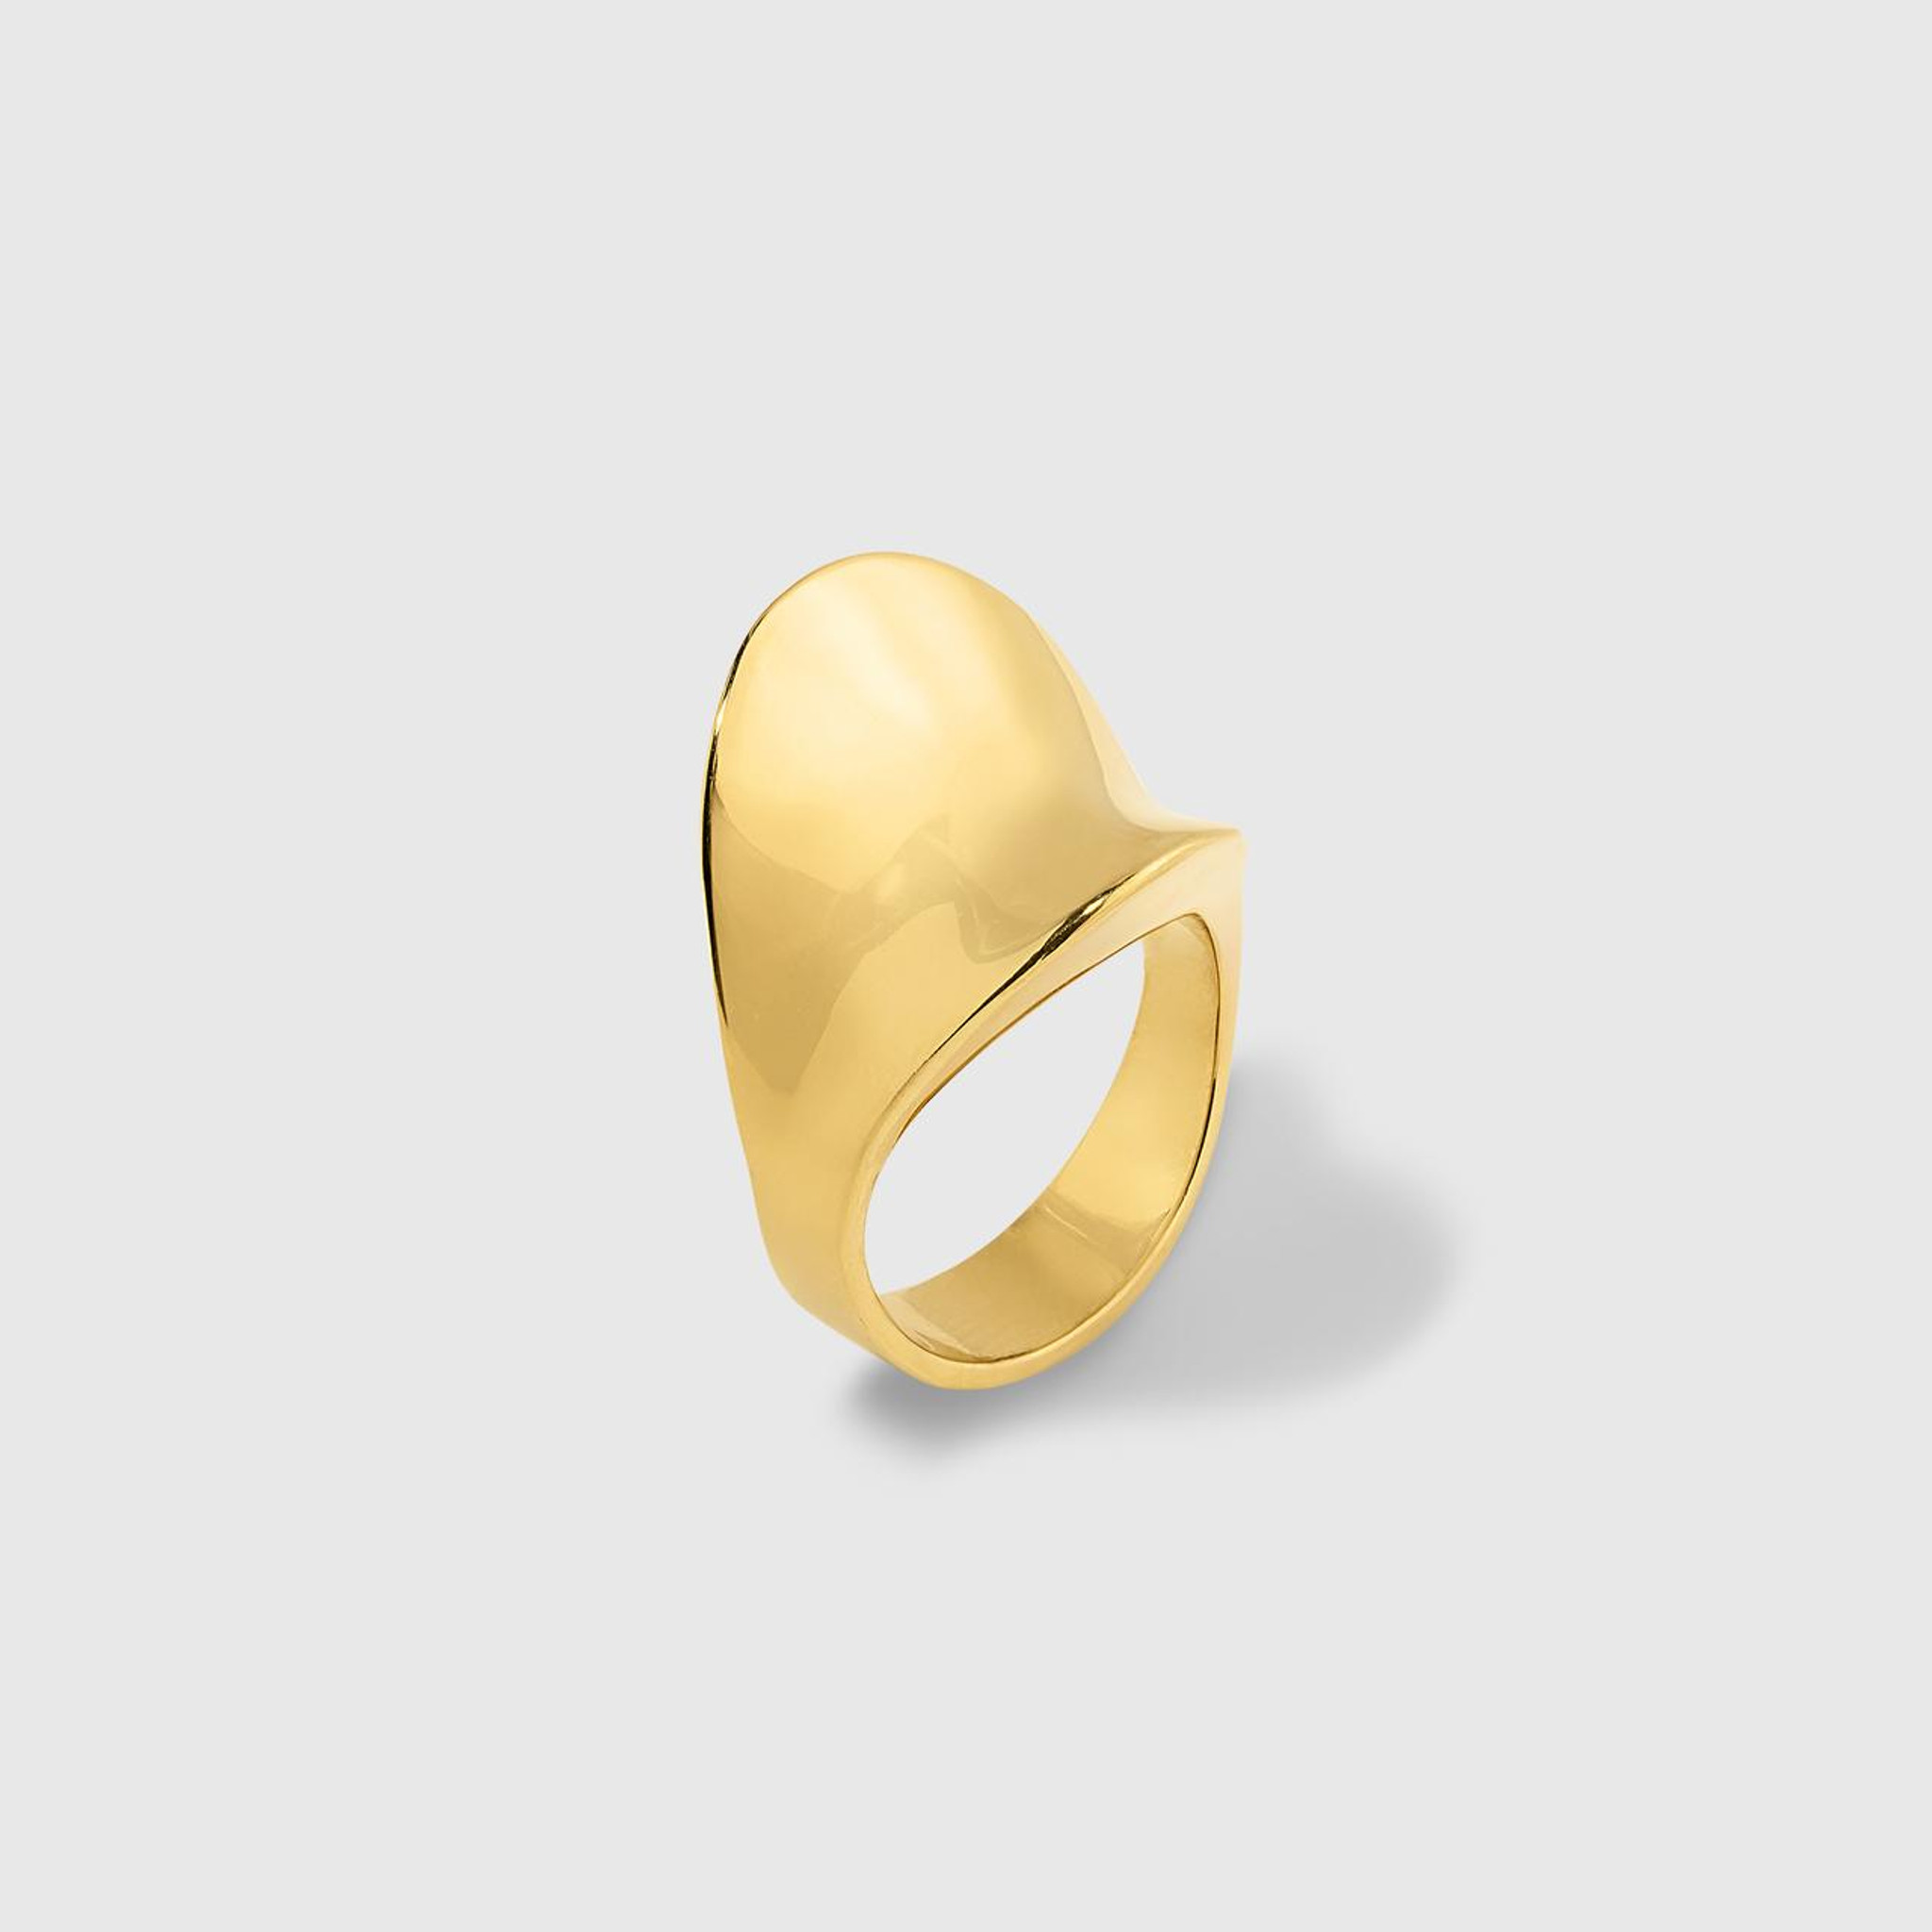 Ashley Childs The Lyra Ring, Gold Vermeil Sterling Silver 